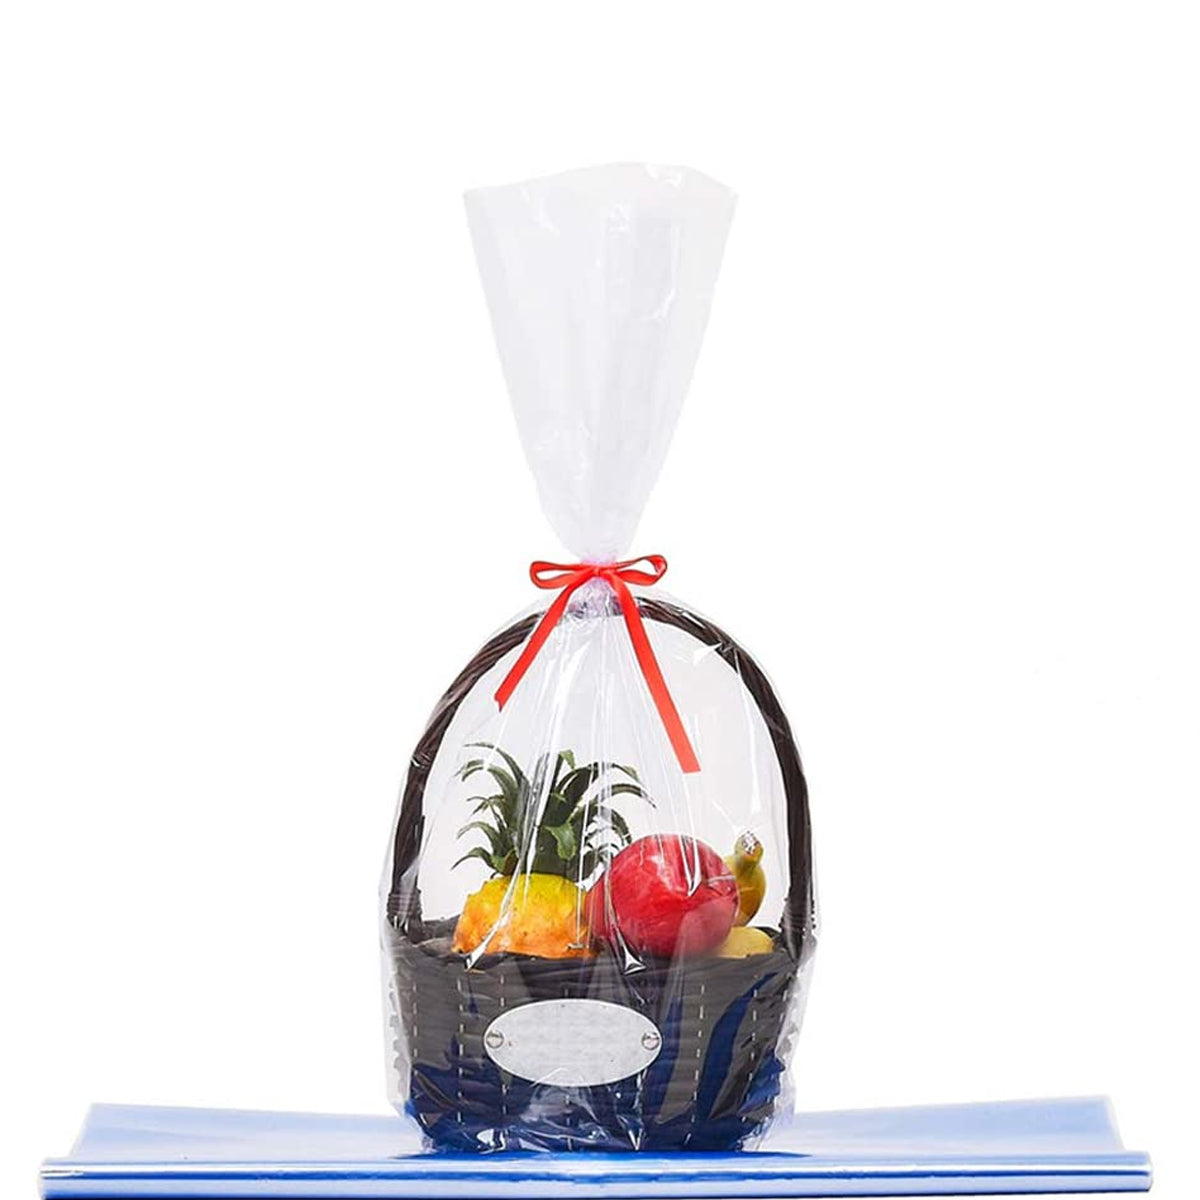 Basket Shrink Wrap With Accent Ribbons – For Gifts, Stylish